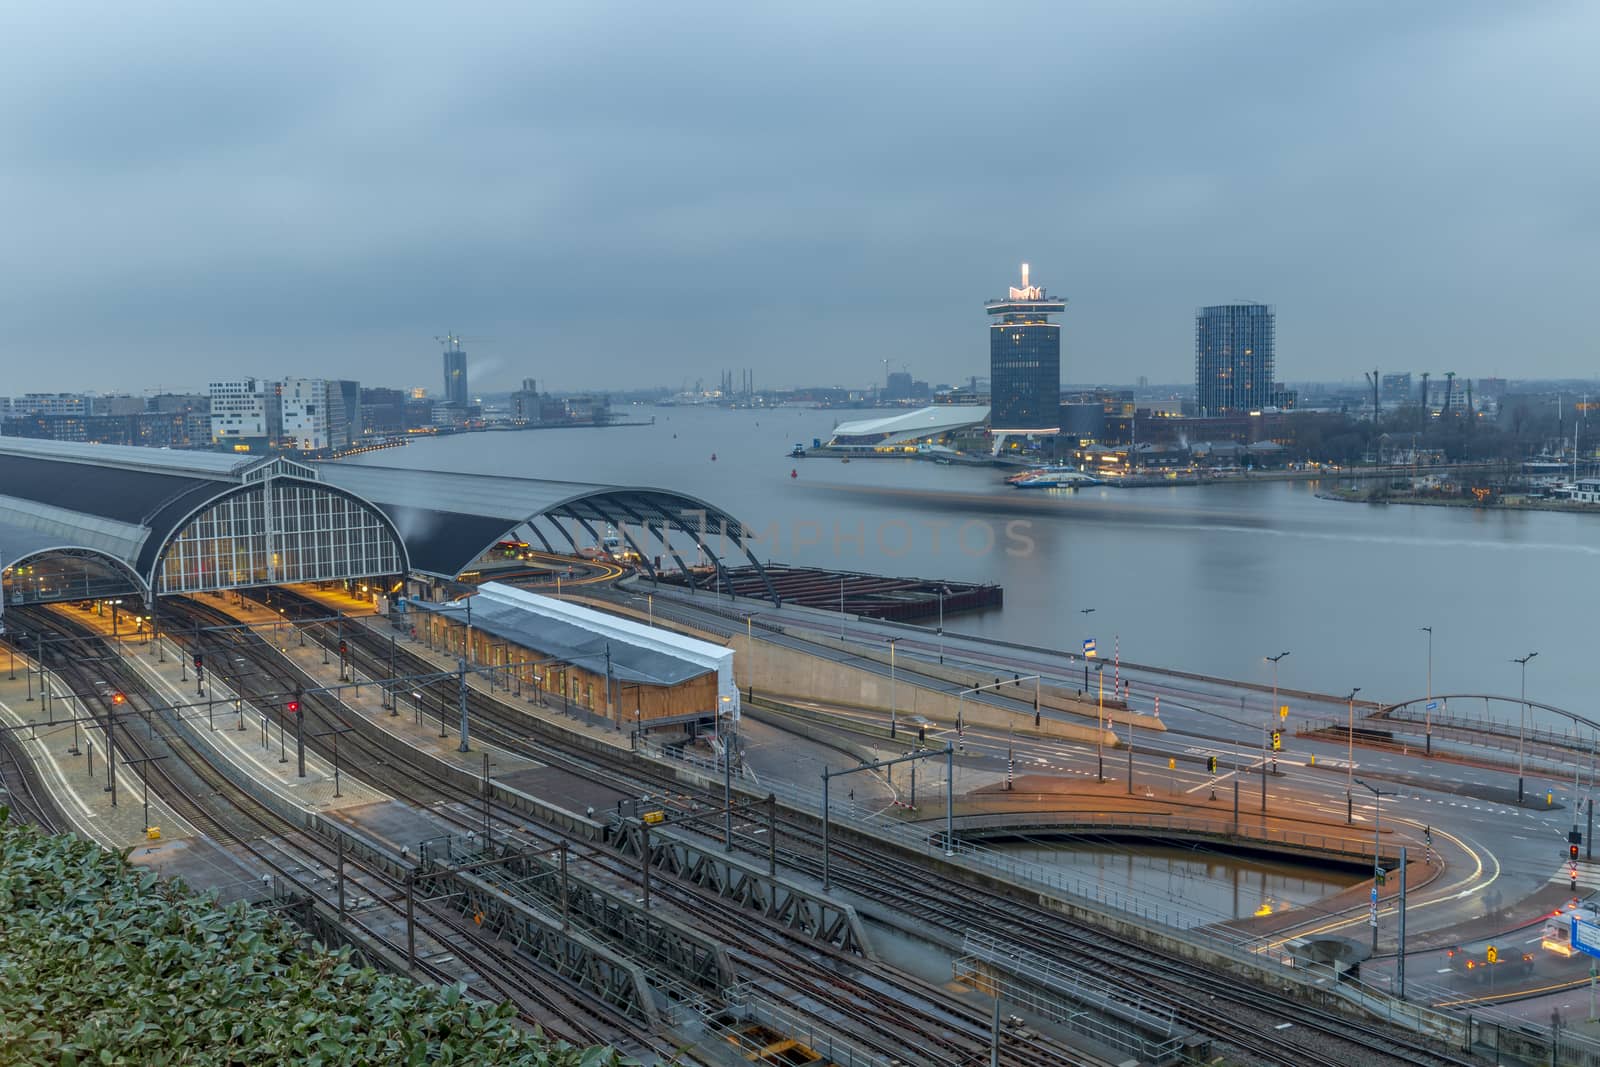 Aerial view of the train station at the edge of the big river in the late evening dull and rainy sky by ankorlight